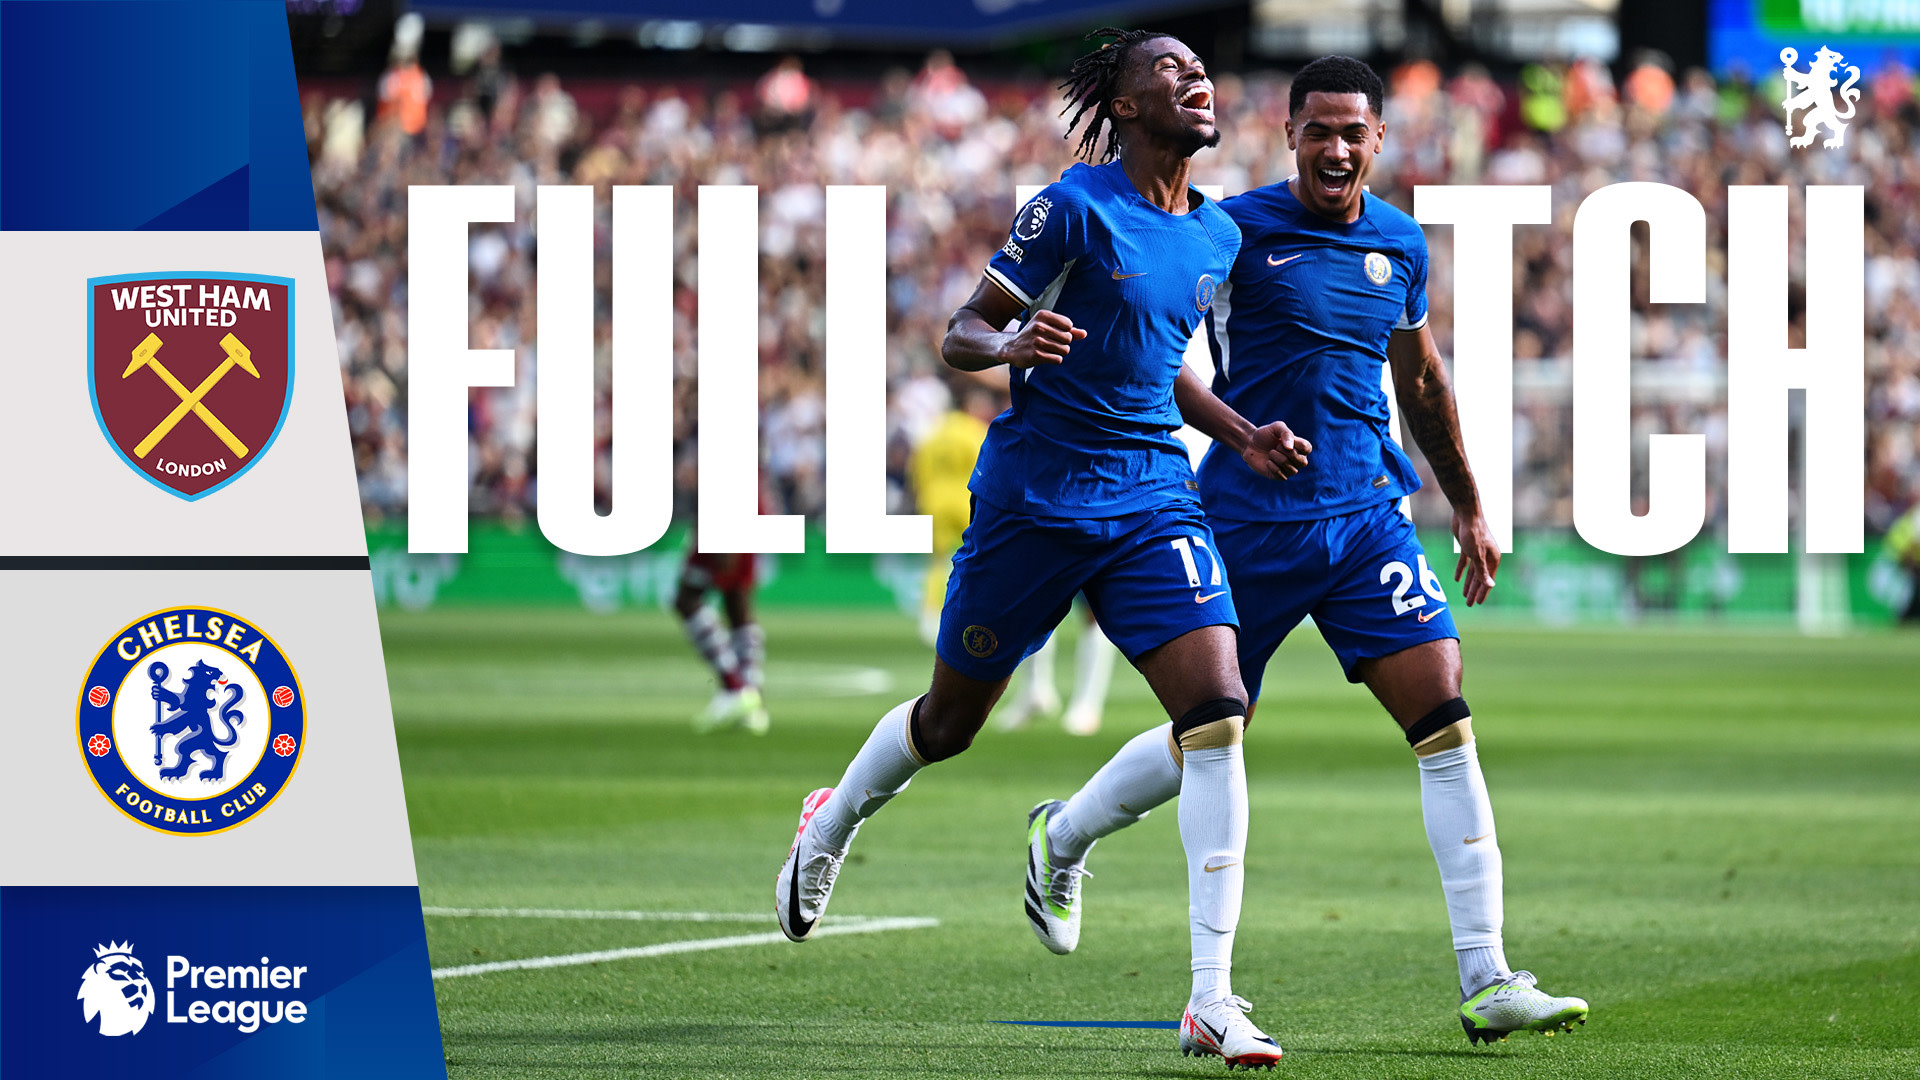 Full Match West Ham 3-1 Chelsea Video Official Site Chelsea Football Club